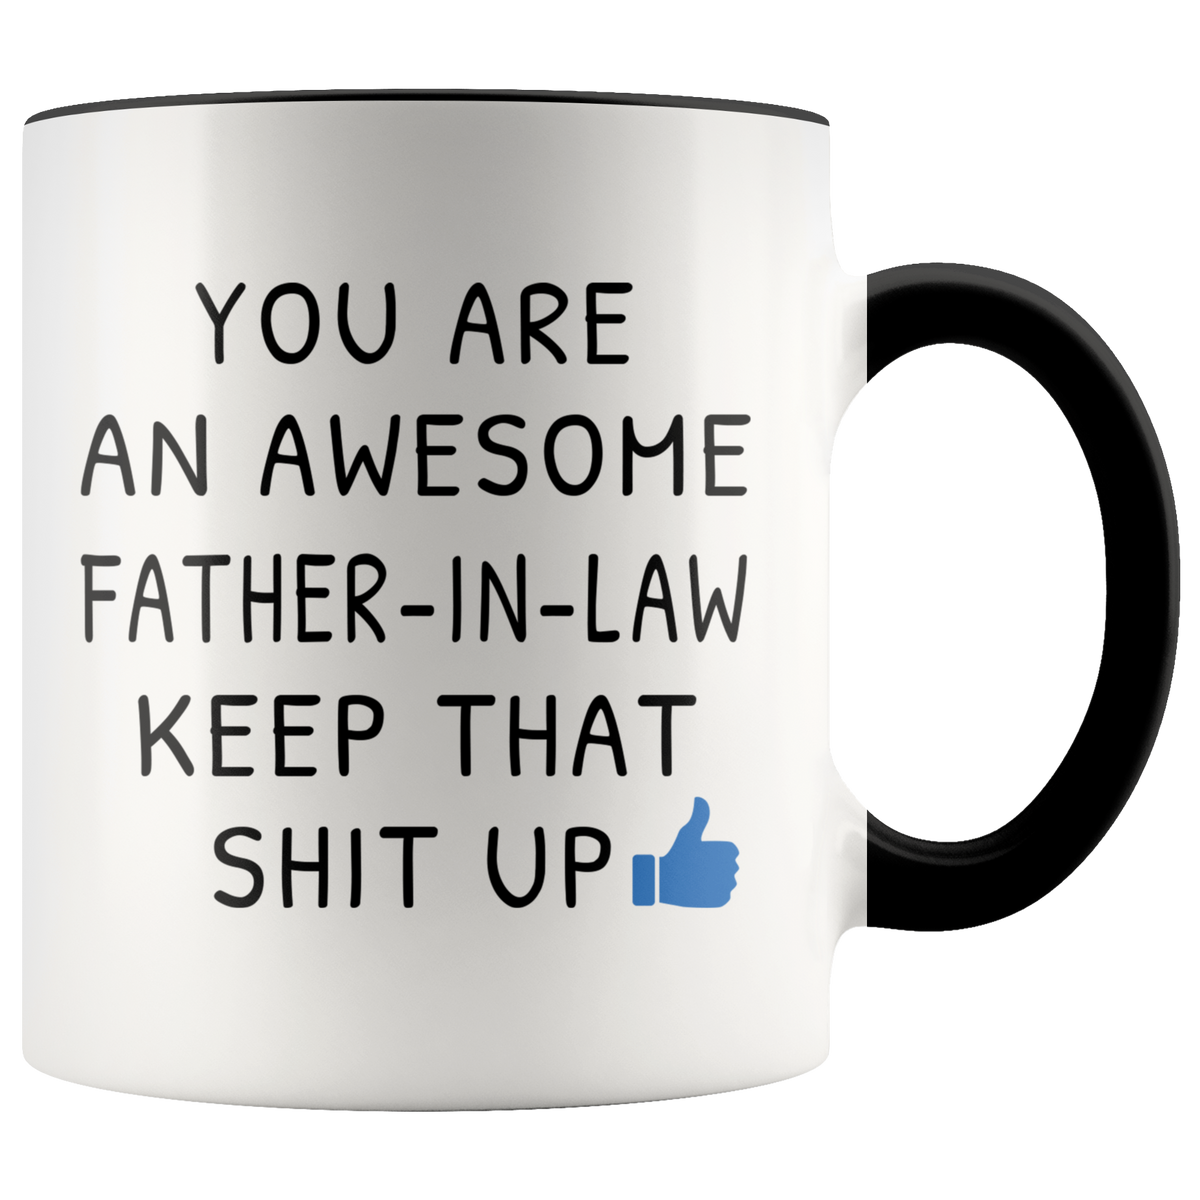 Funny Gift For Father In Law - You Are An Awesome Father In Law Accent Coffee Mug 11oz